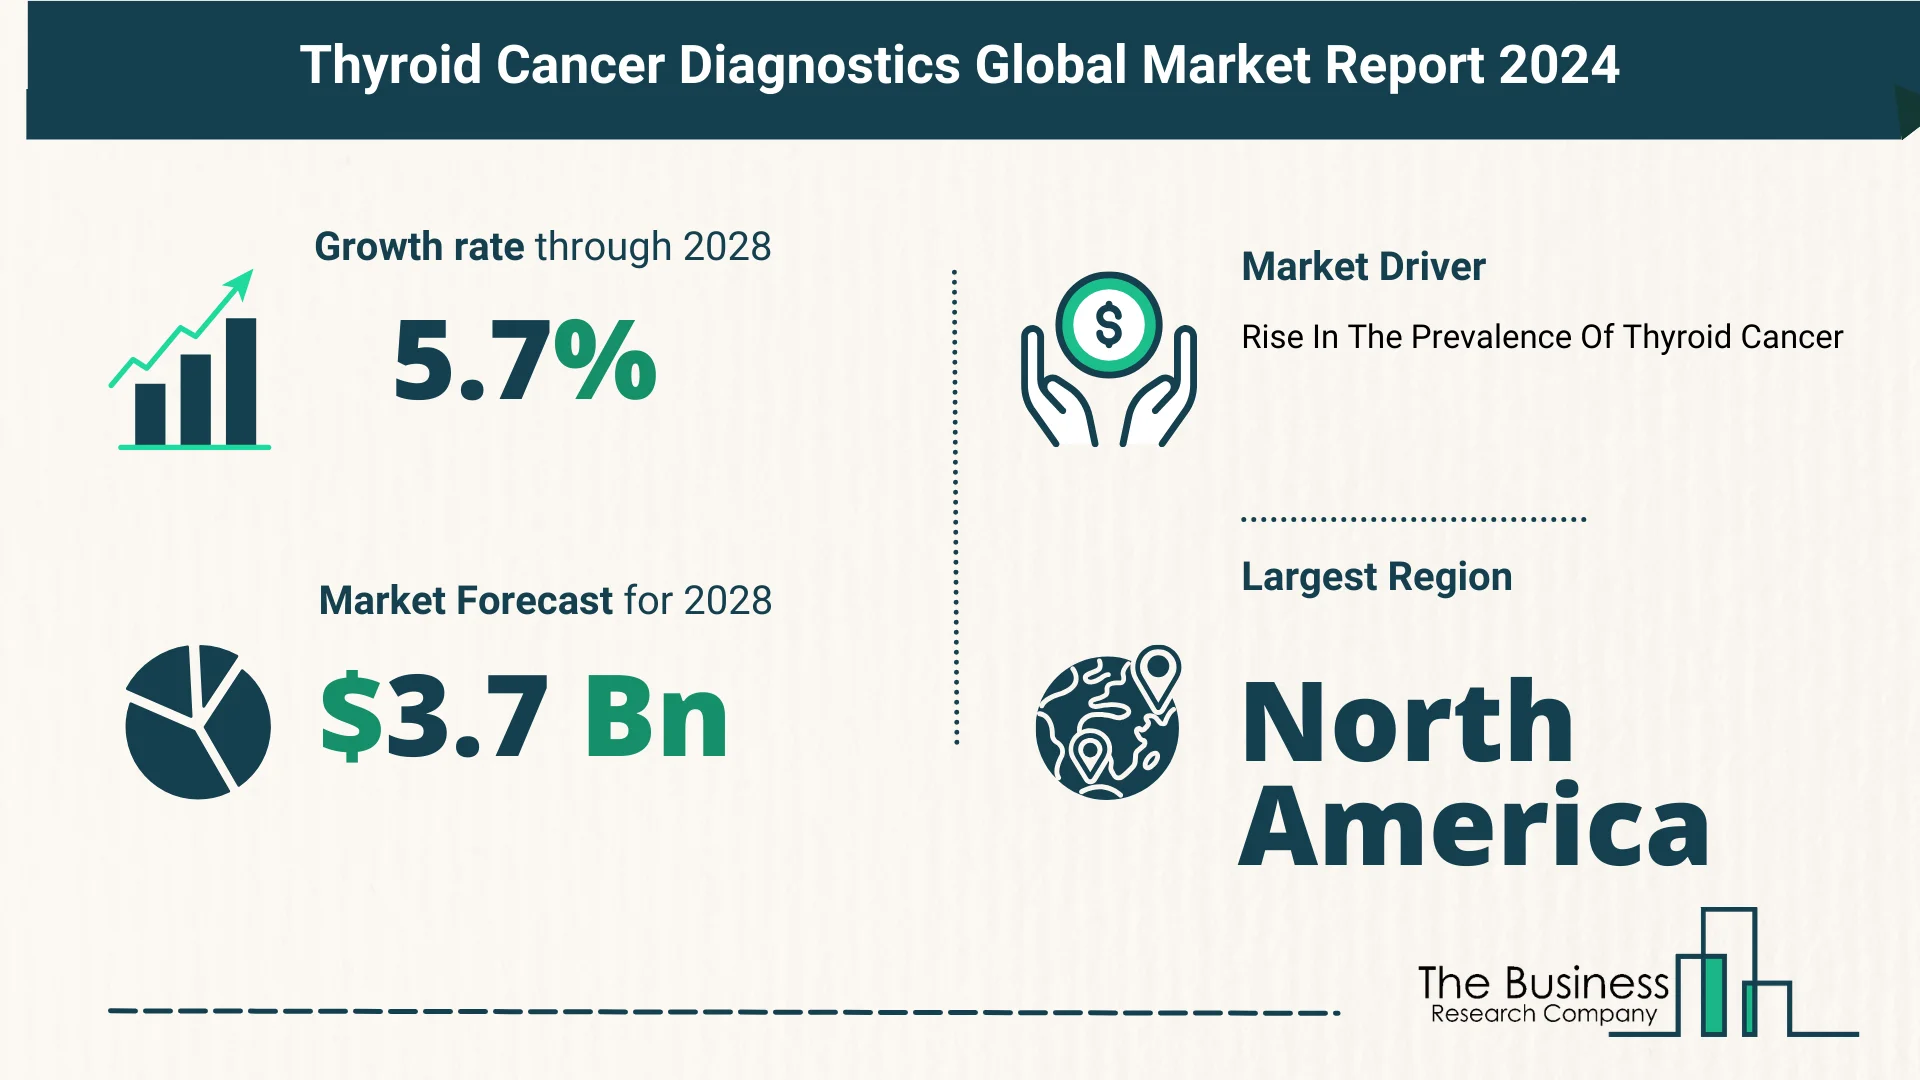 5 Takeaways From The Thyroid Cancer Diagnostics Market Overview 2024